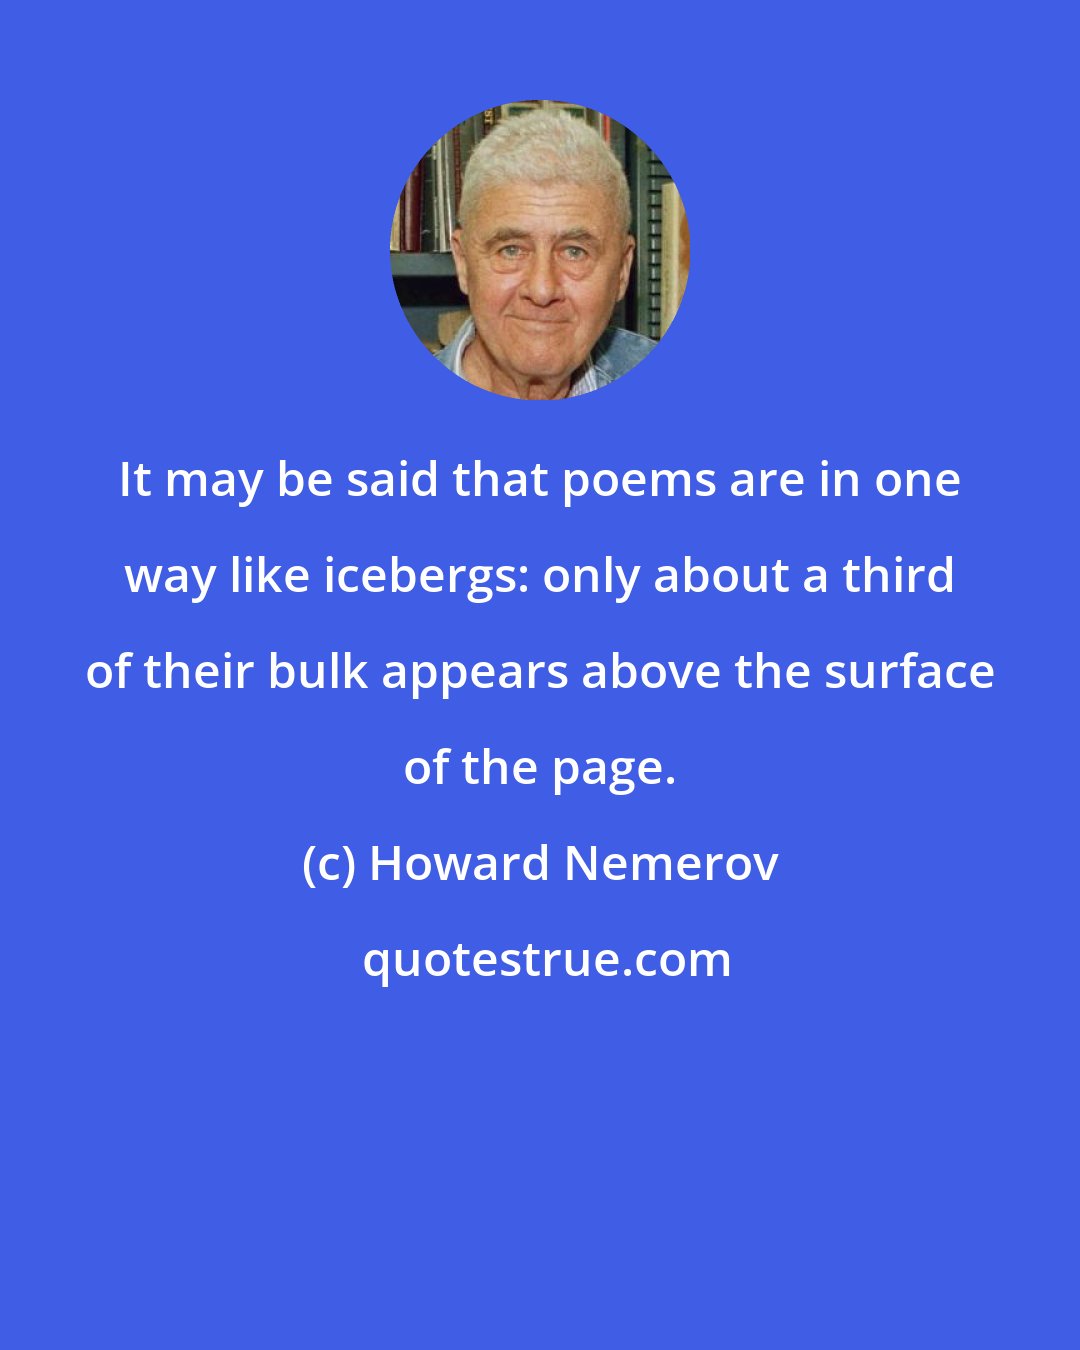 Howard Nemerov: It may be said that poems are in one way like icebergs: only about a third of their bulk appears above the surface of the page.